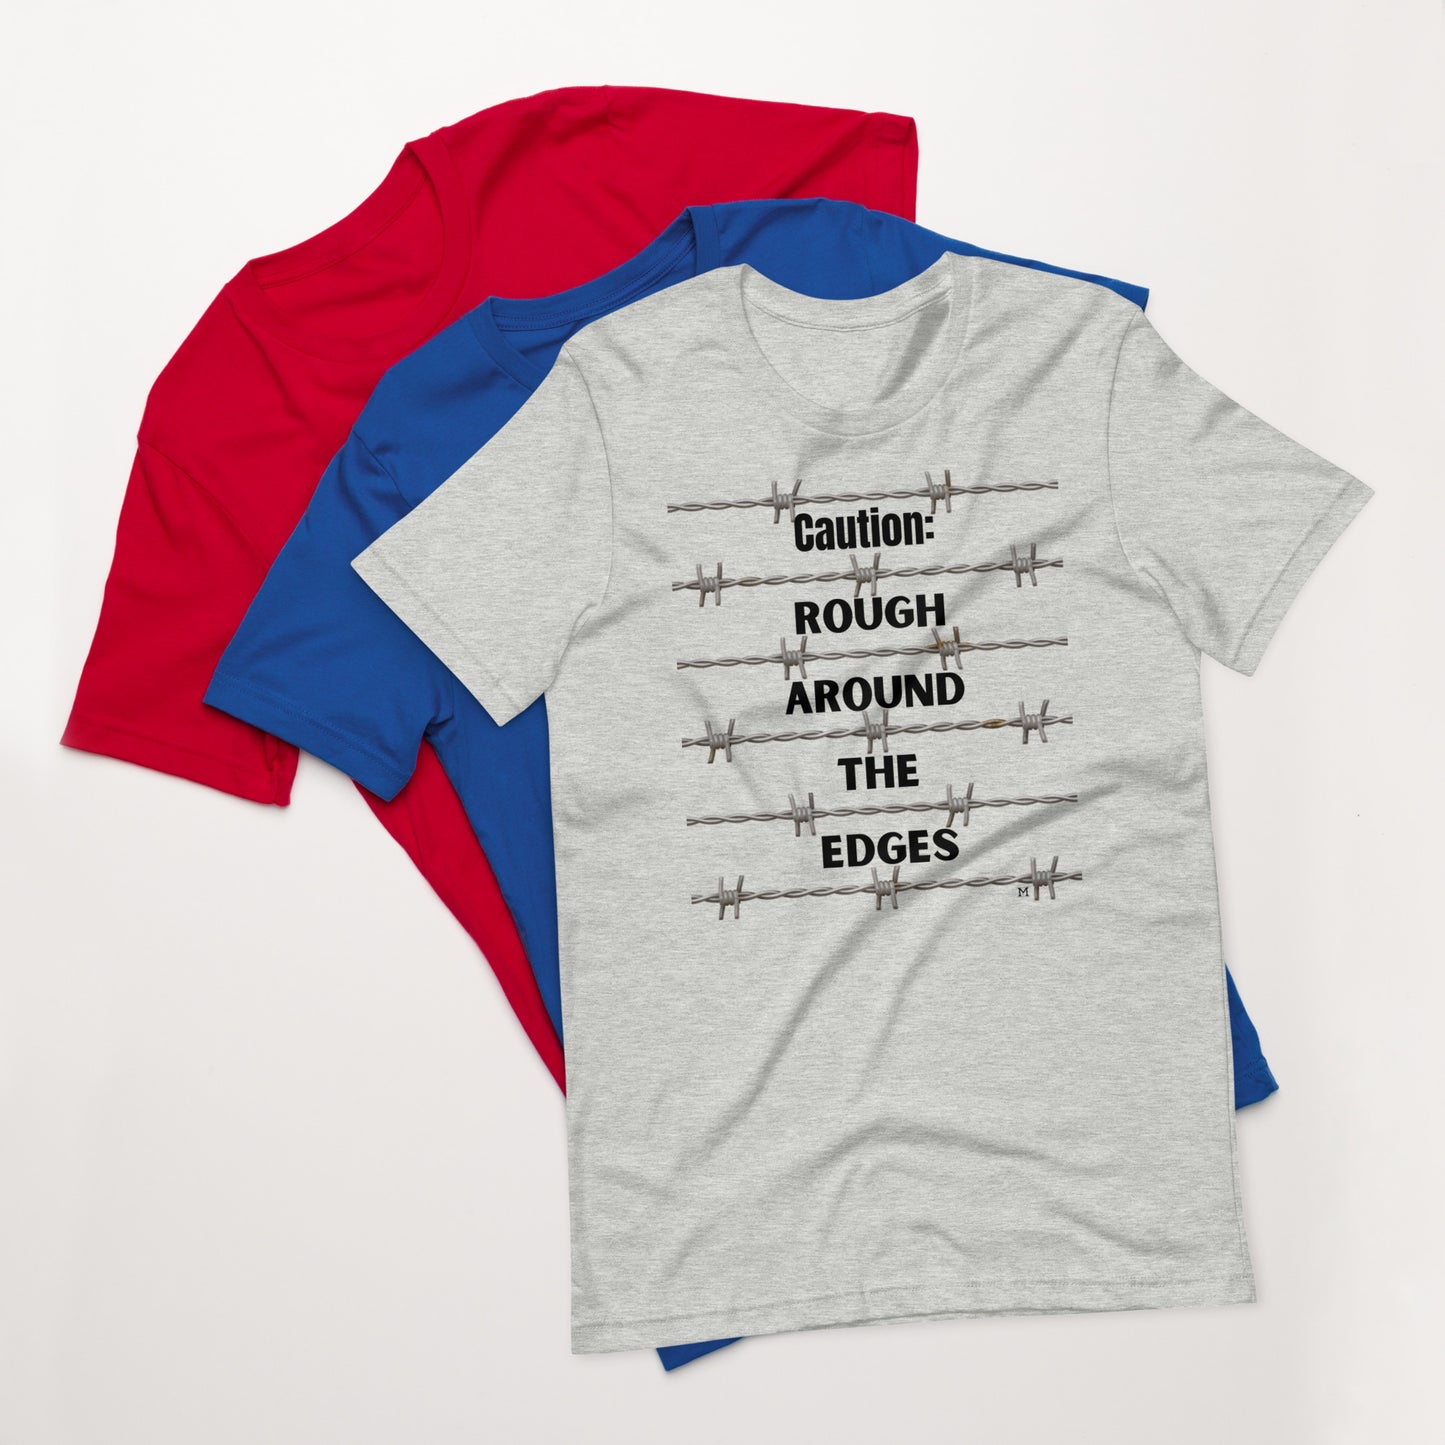 Caution: Know Someone Who Is Rough Around The Edges? MII Designs Unisex t-shirt